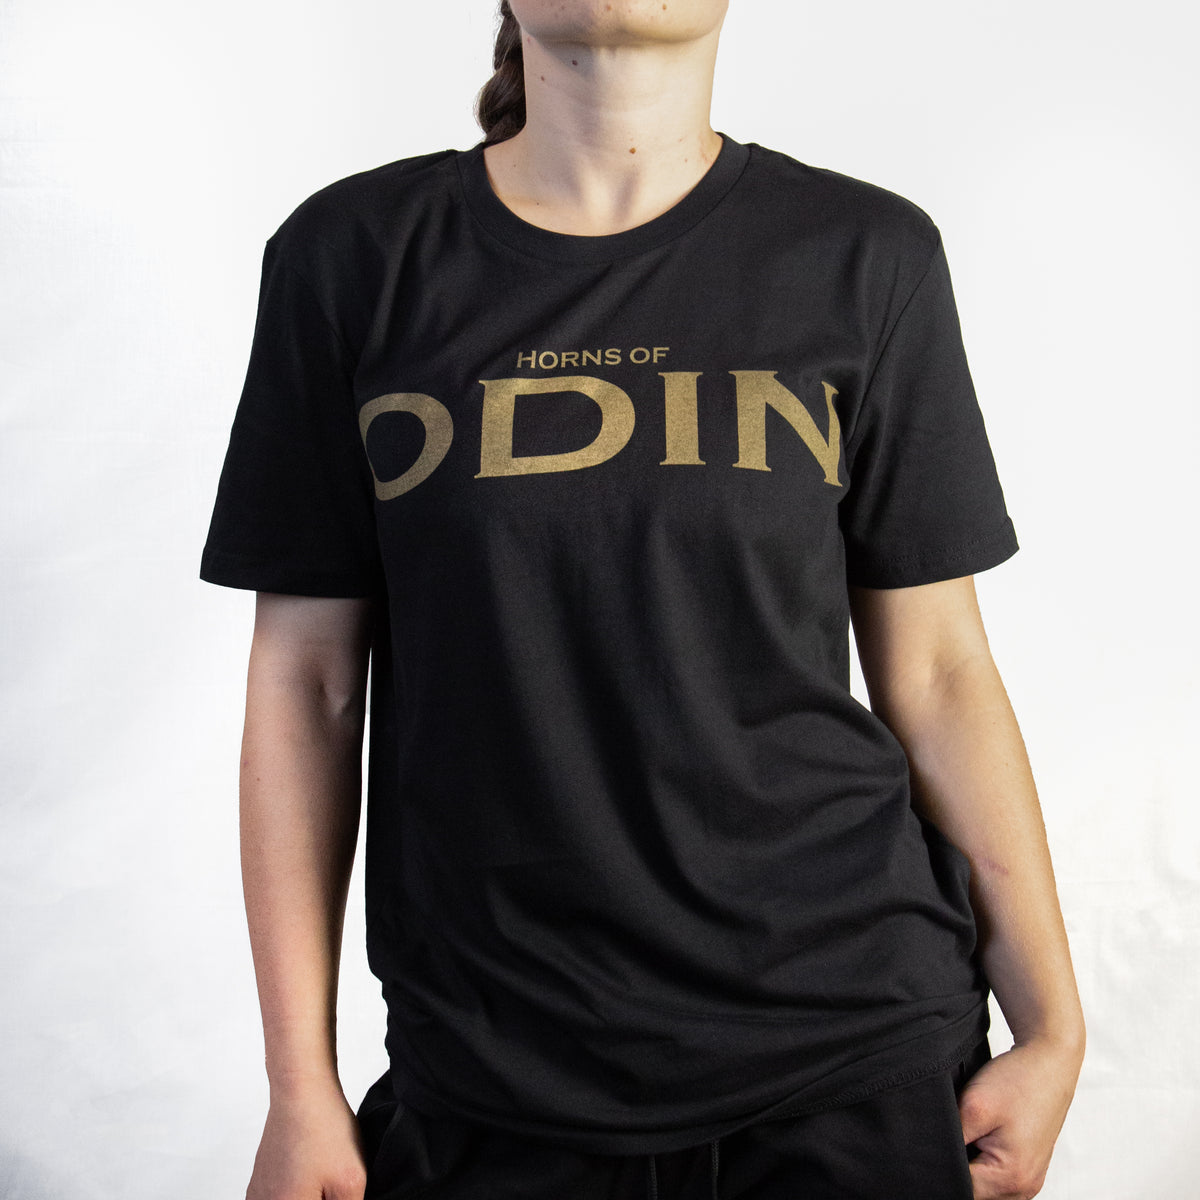 Black unisex T-shirt with "Horns of Odin" in Gold